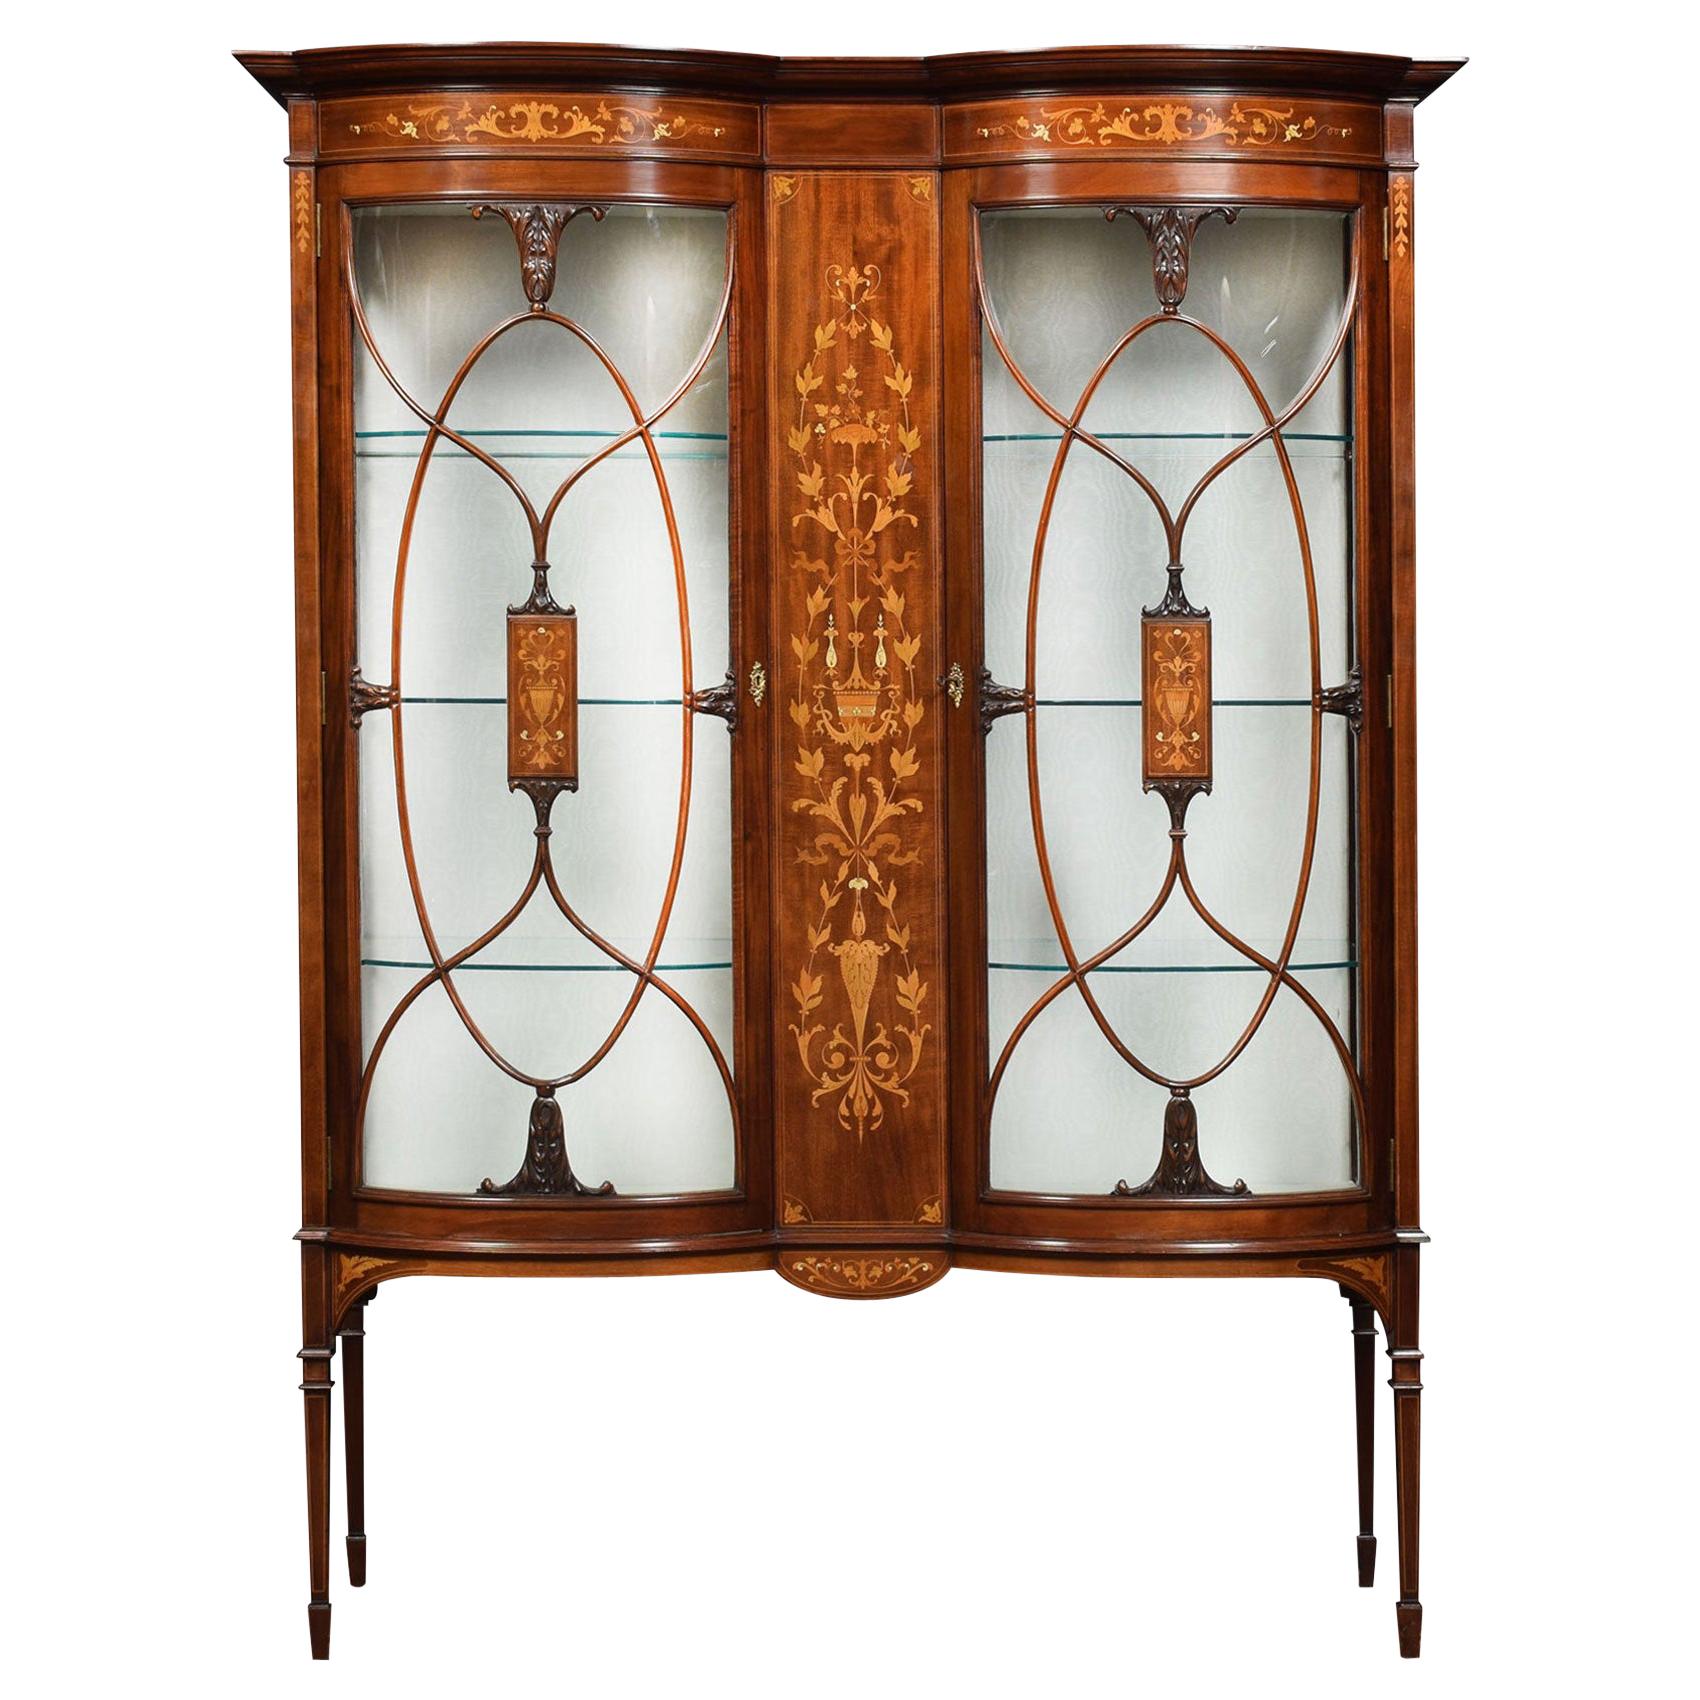 Mahogany and Marquetry Inlaid Display Cabinets